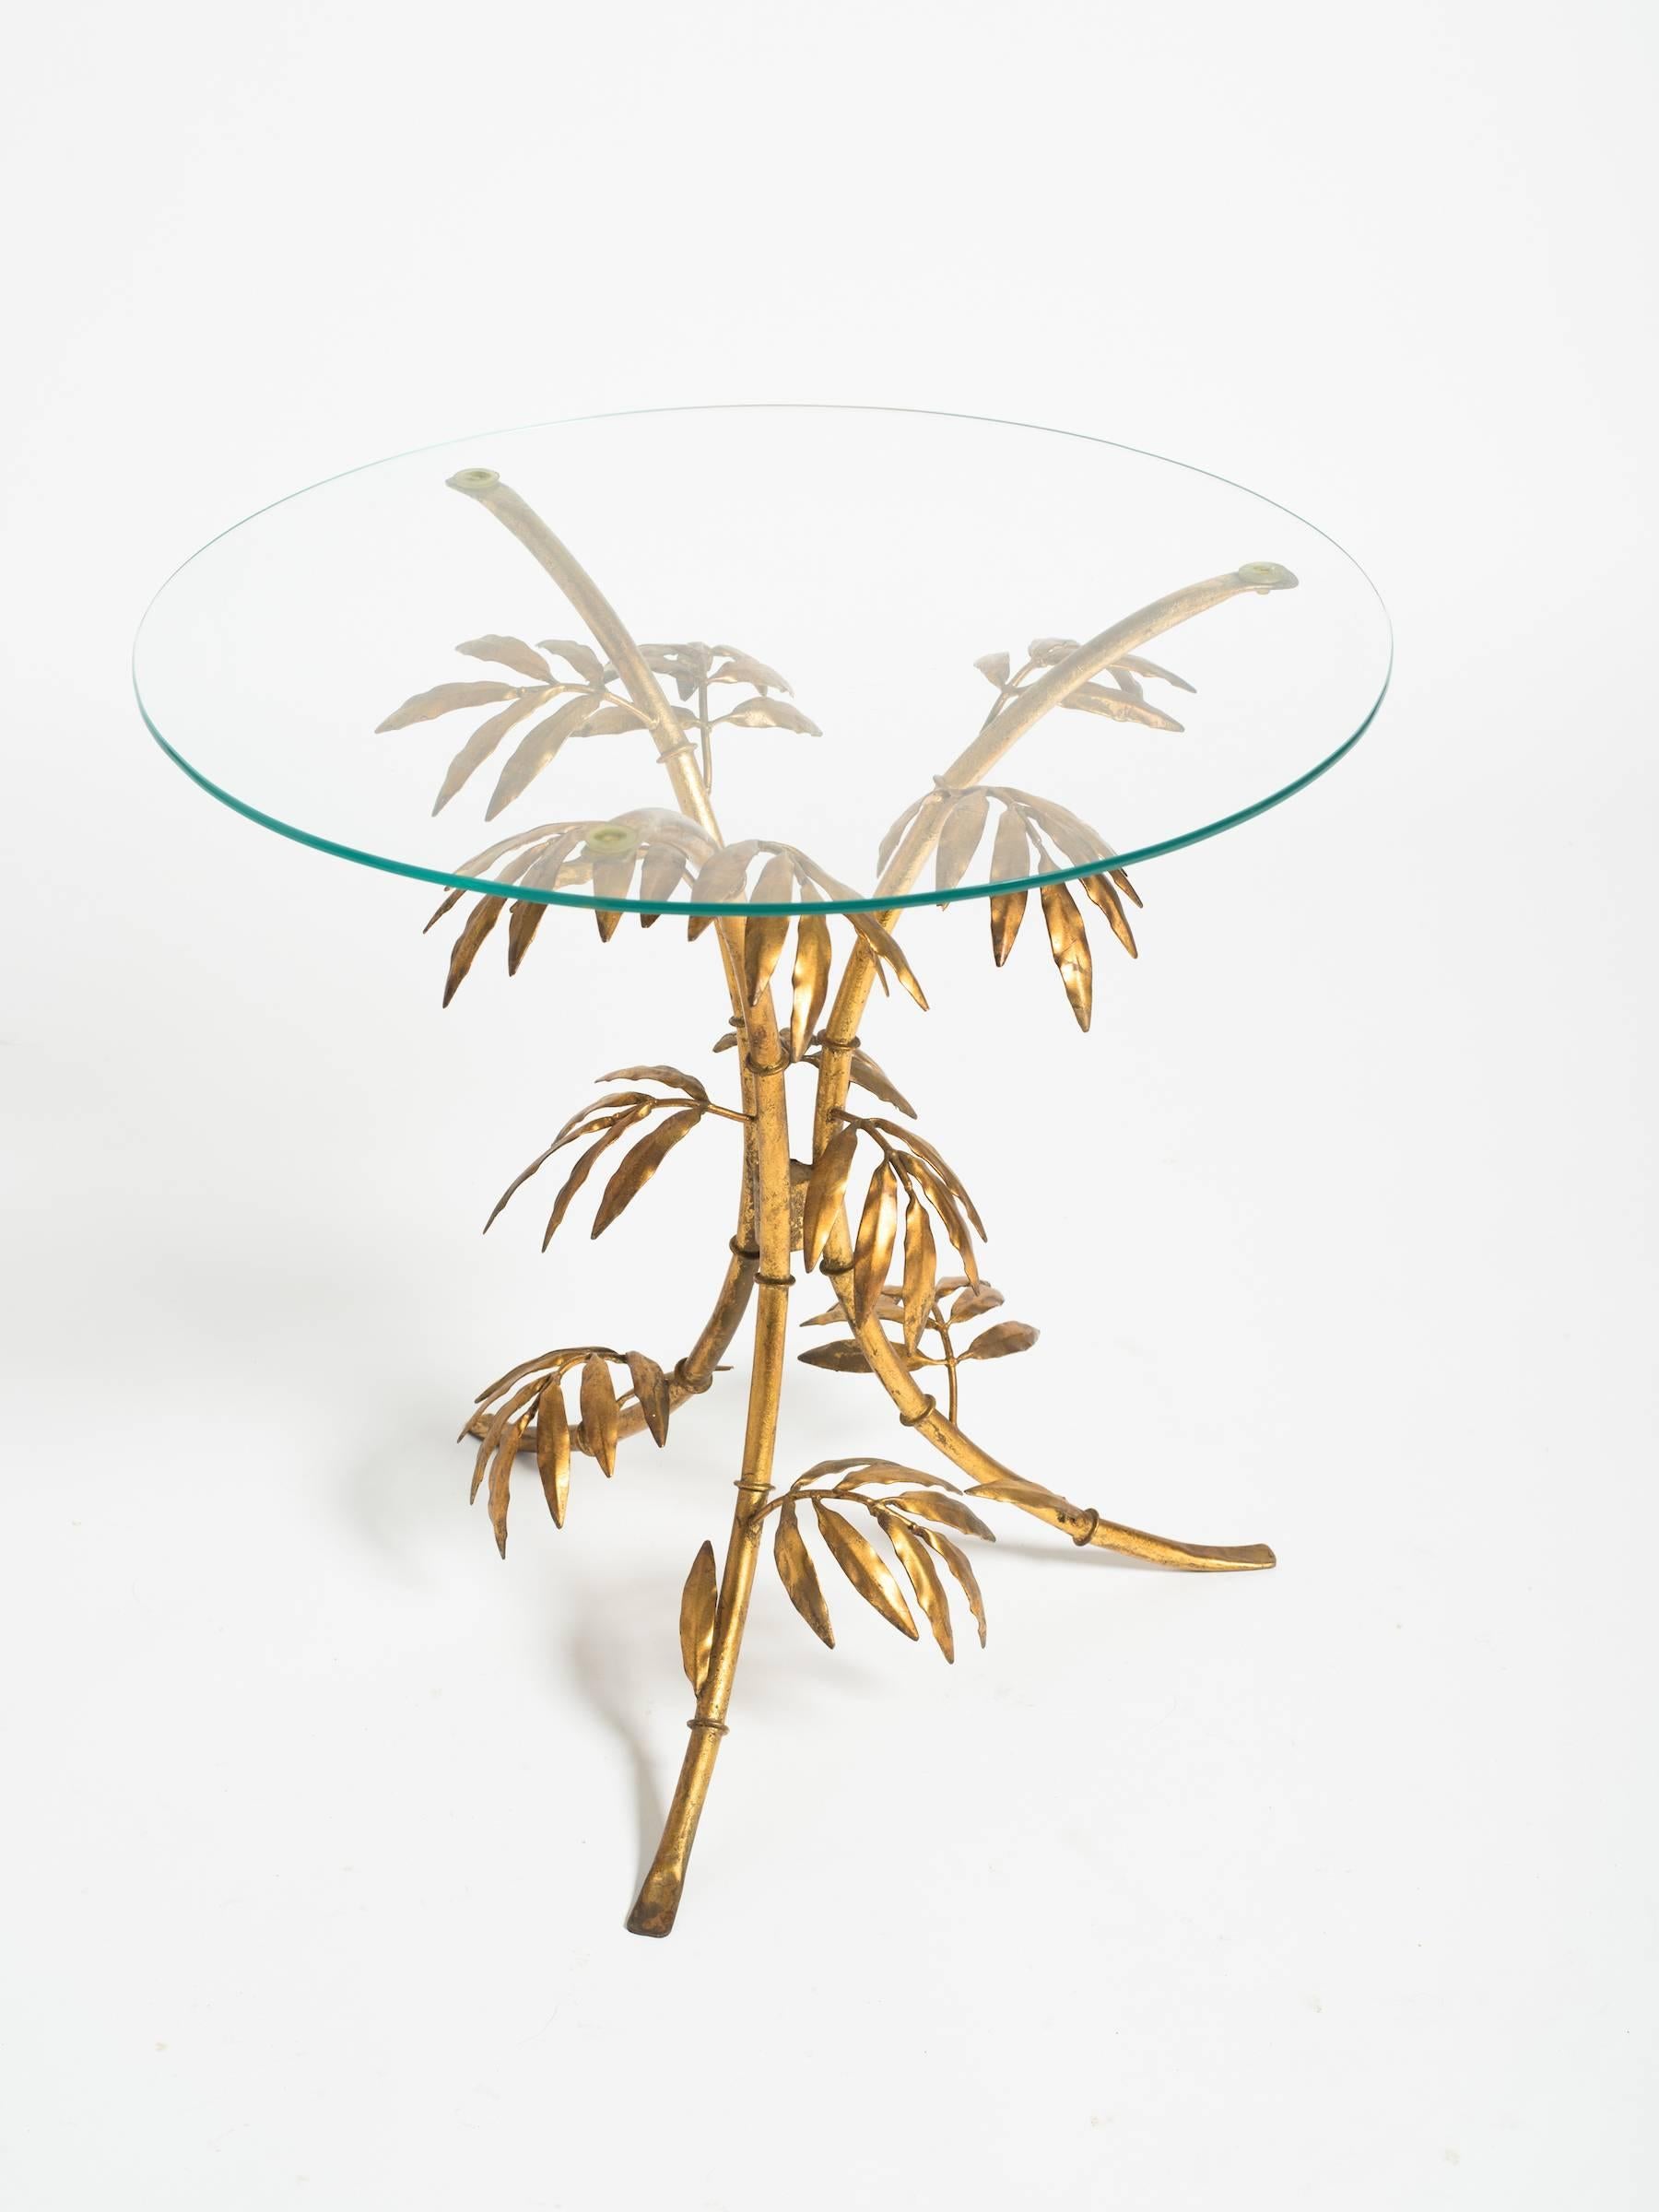 1960s Italian faux bamboo gilt metal side table with glass top.